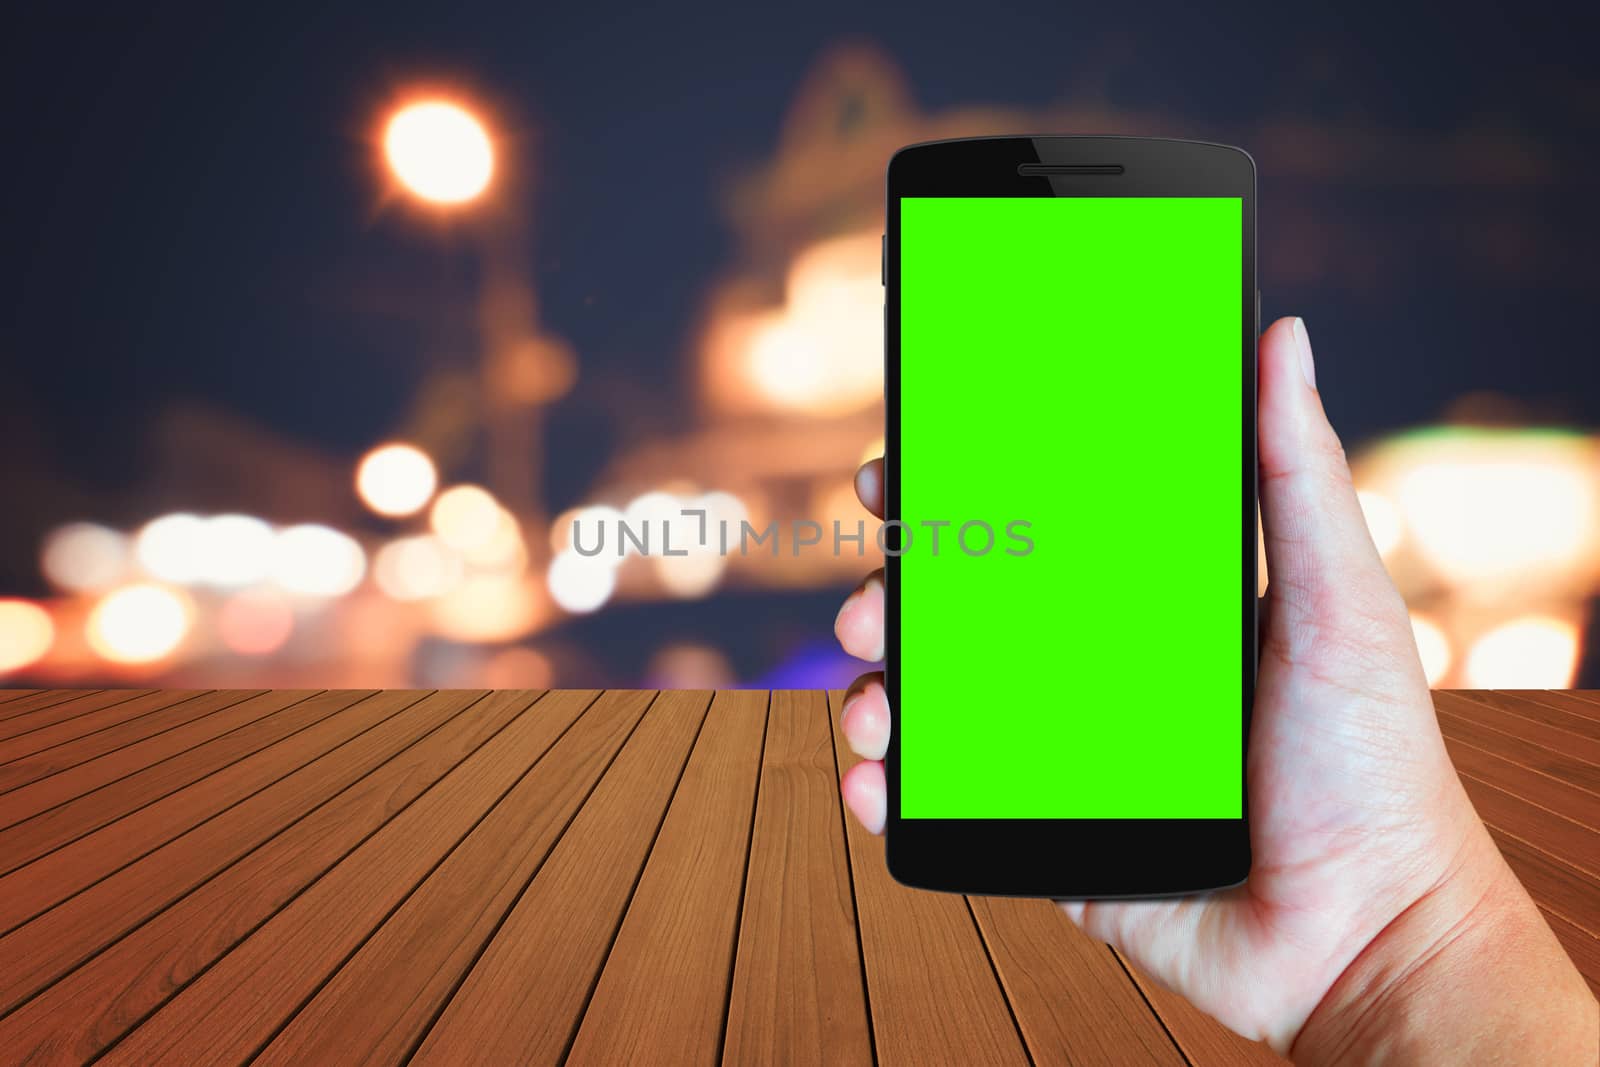 Modern mobile phone in the hand,on blur background image 